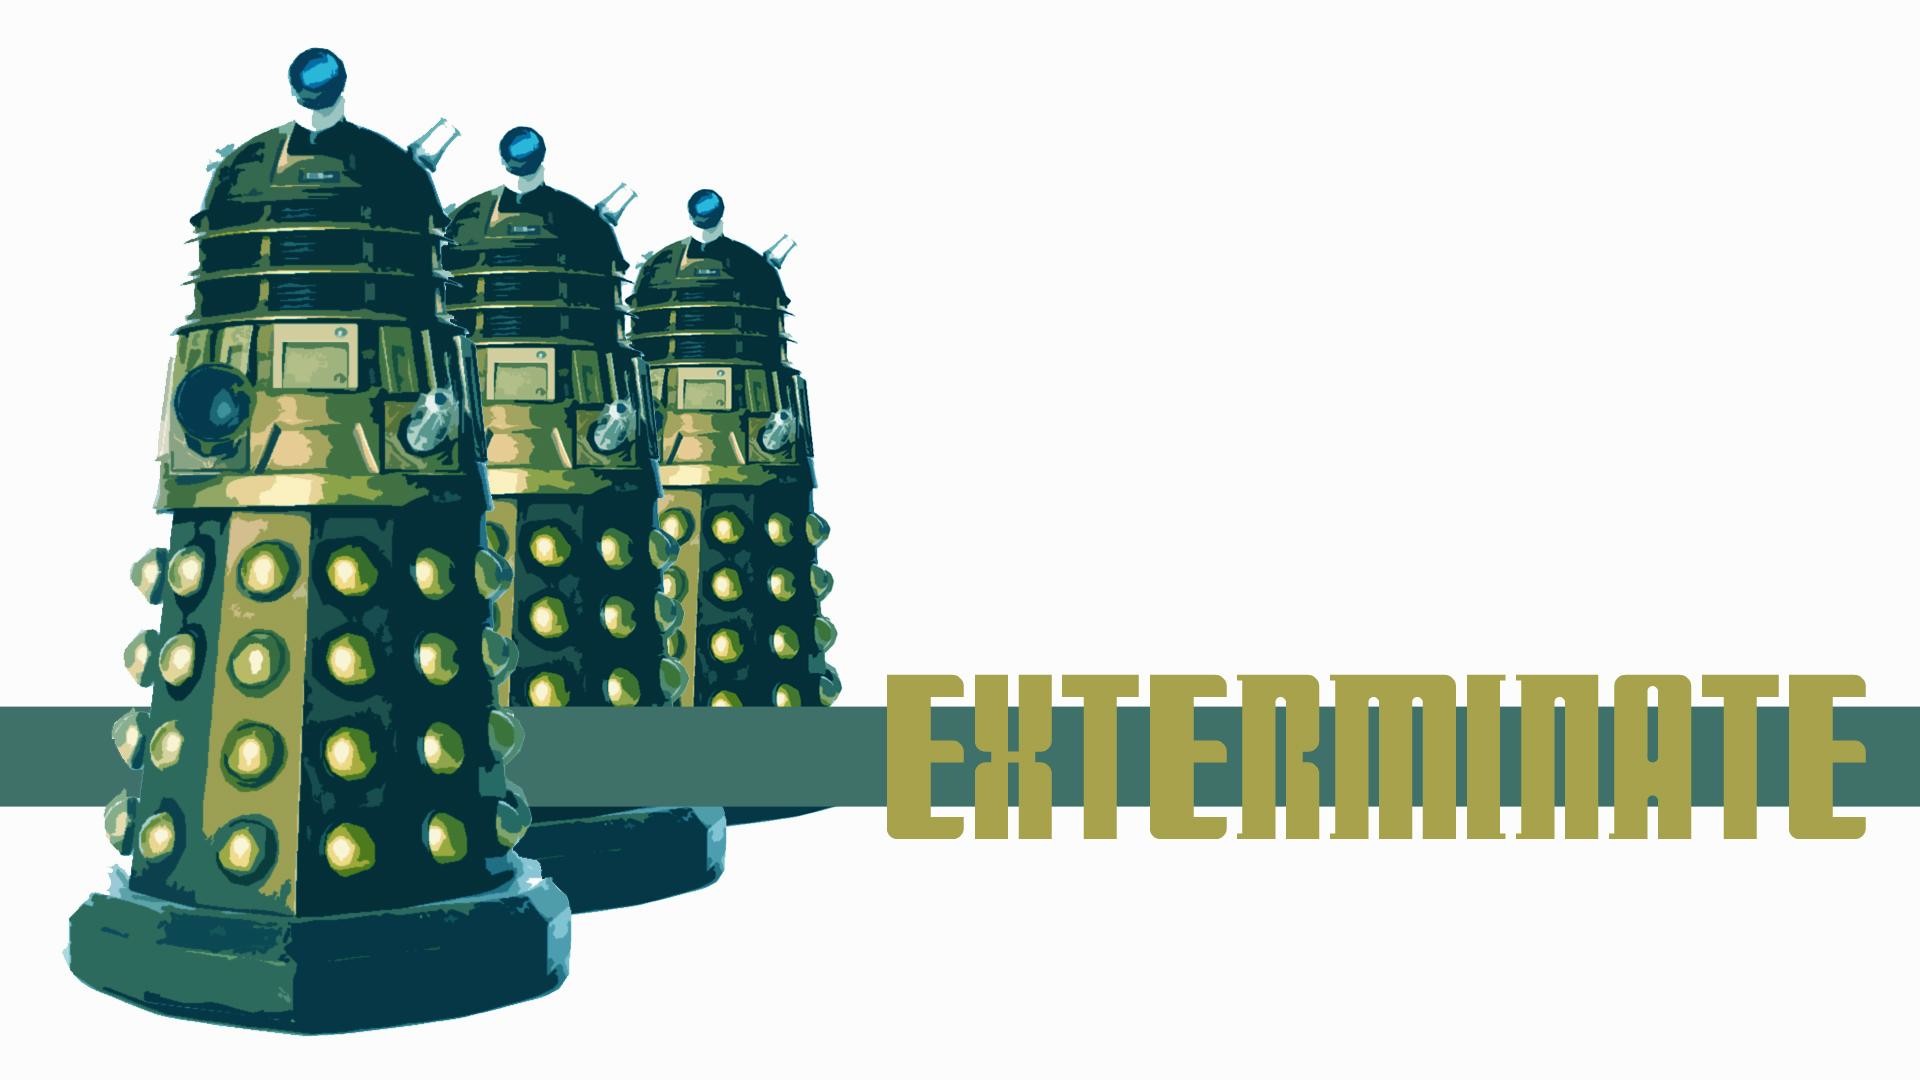 1920x1080 doctor-who-1920%C3%971080-wallpaper-wp2001305